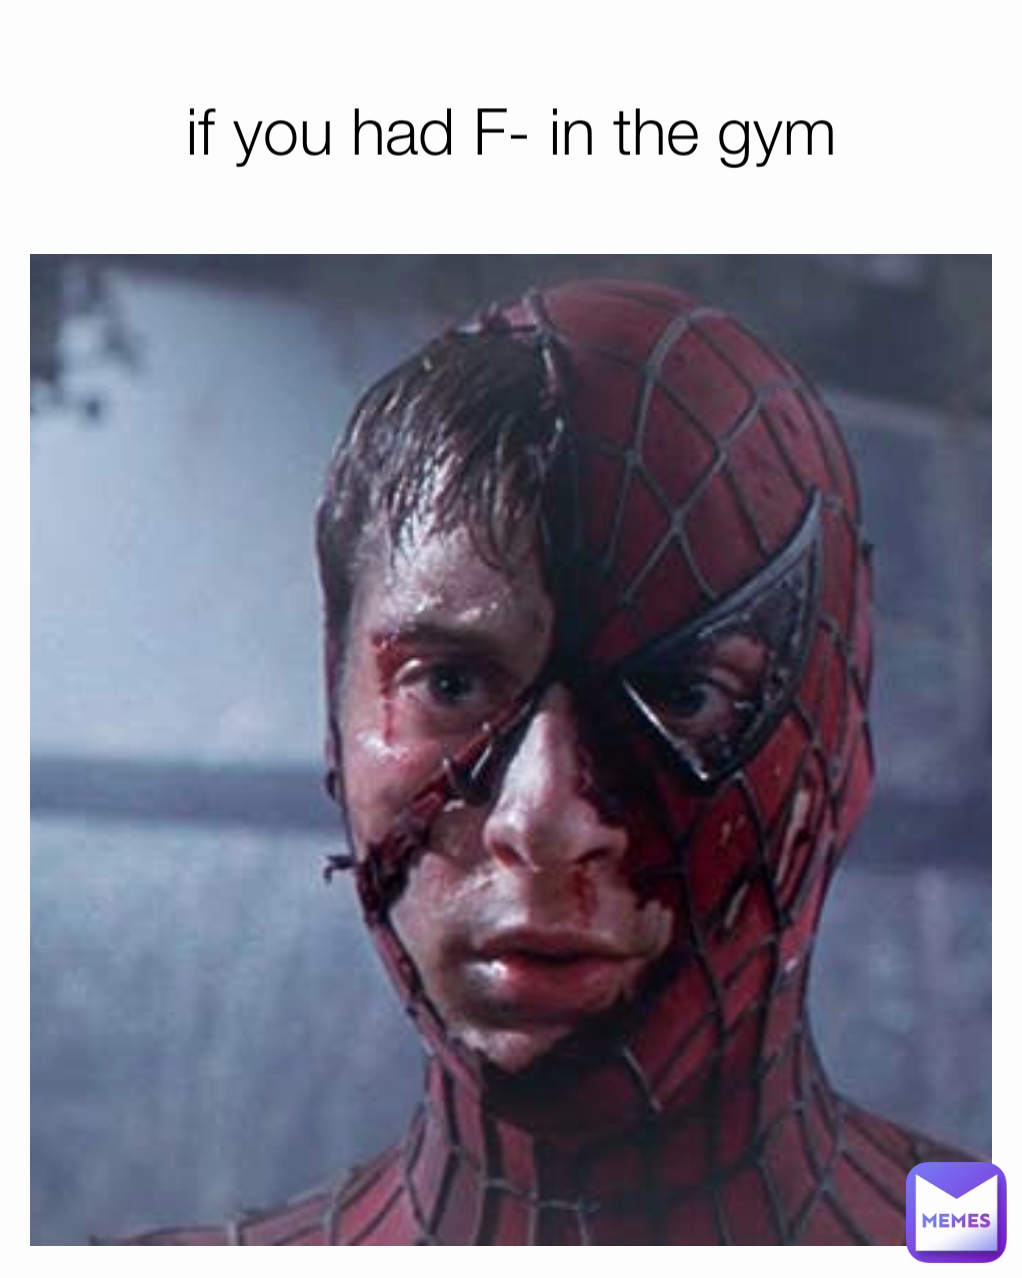 if you had F- in the gym